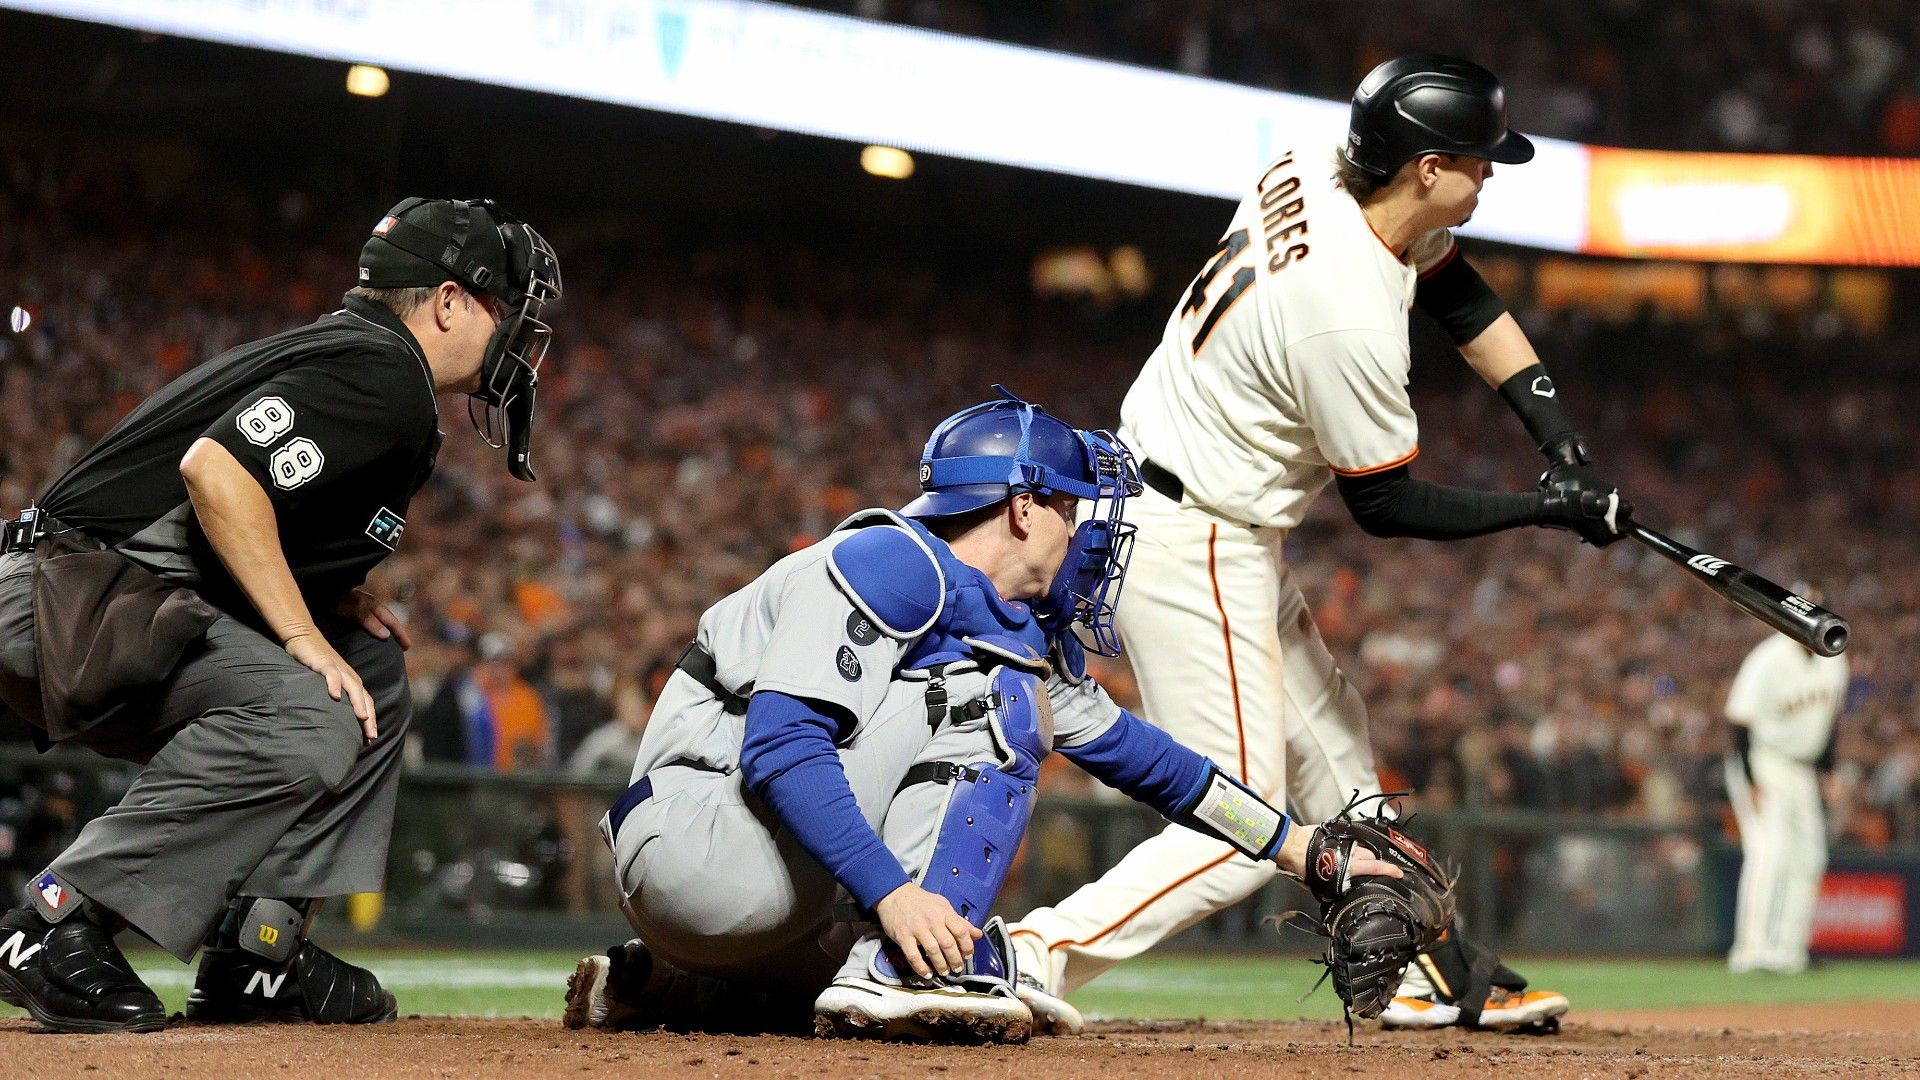 Last call for Giants: Flores rung up, super SF season ends